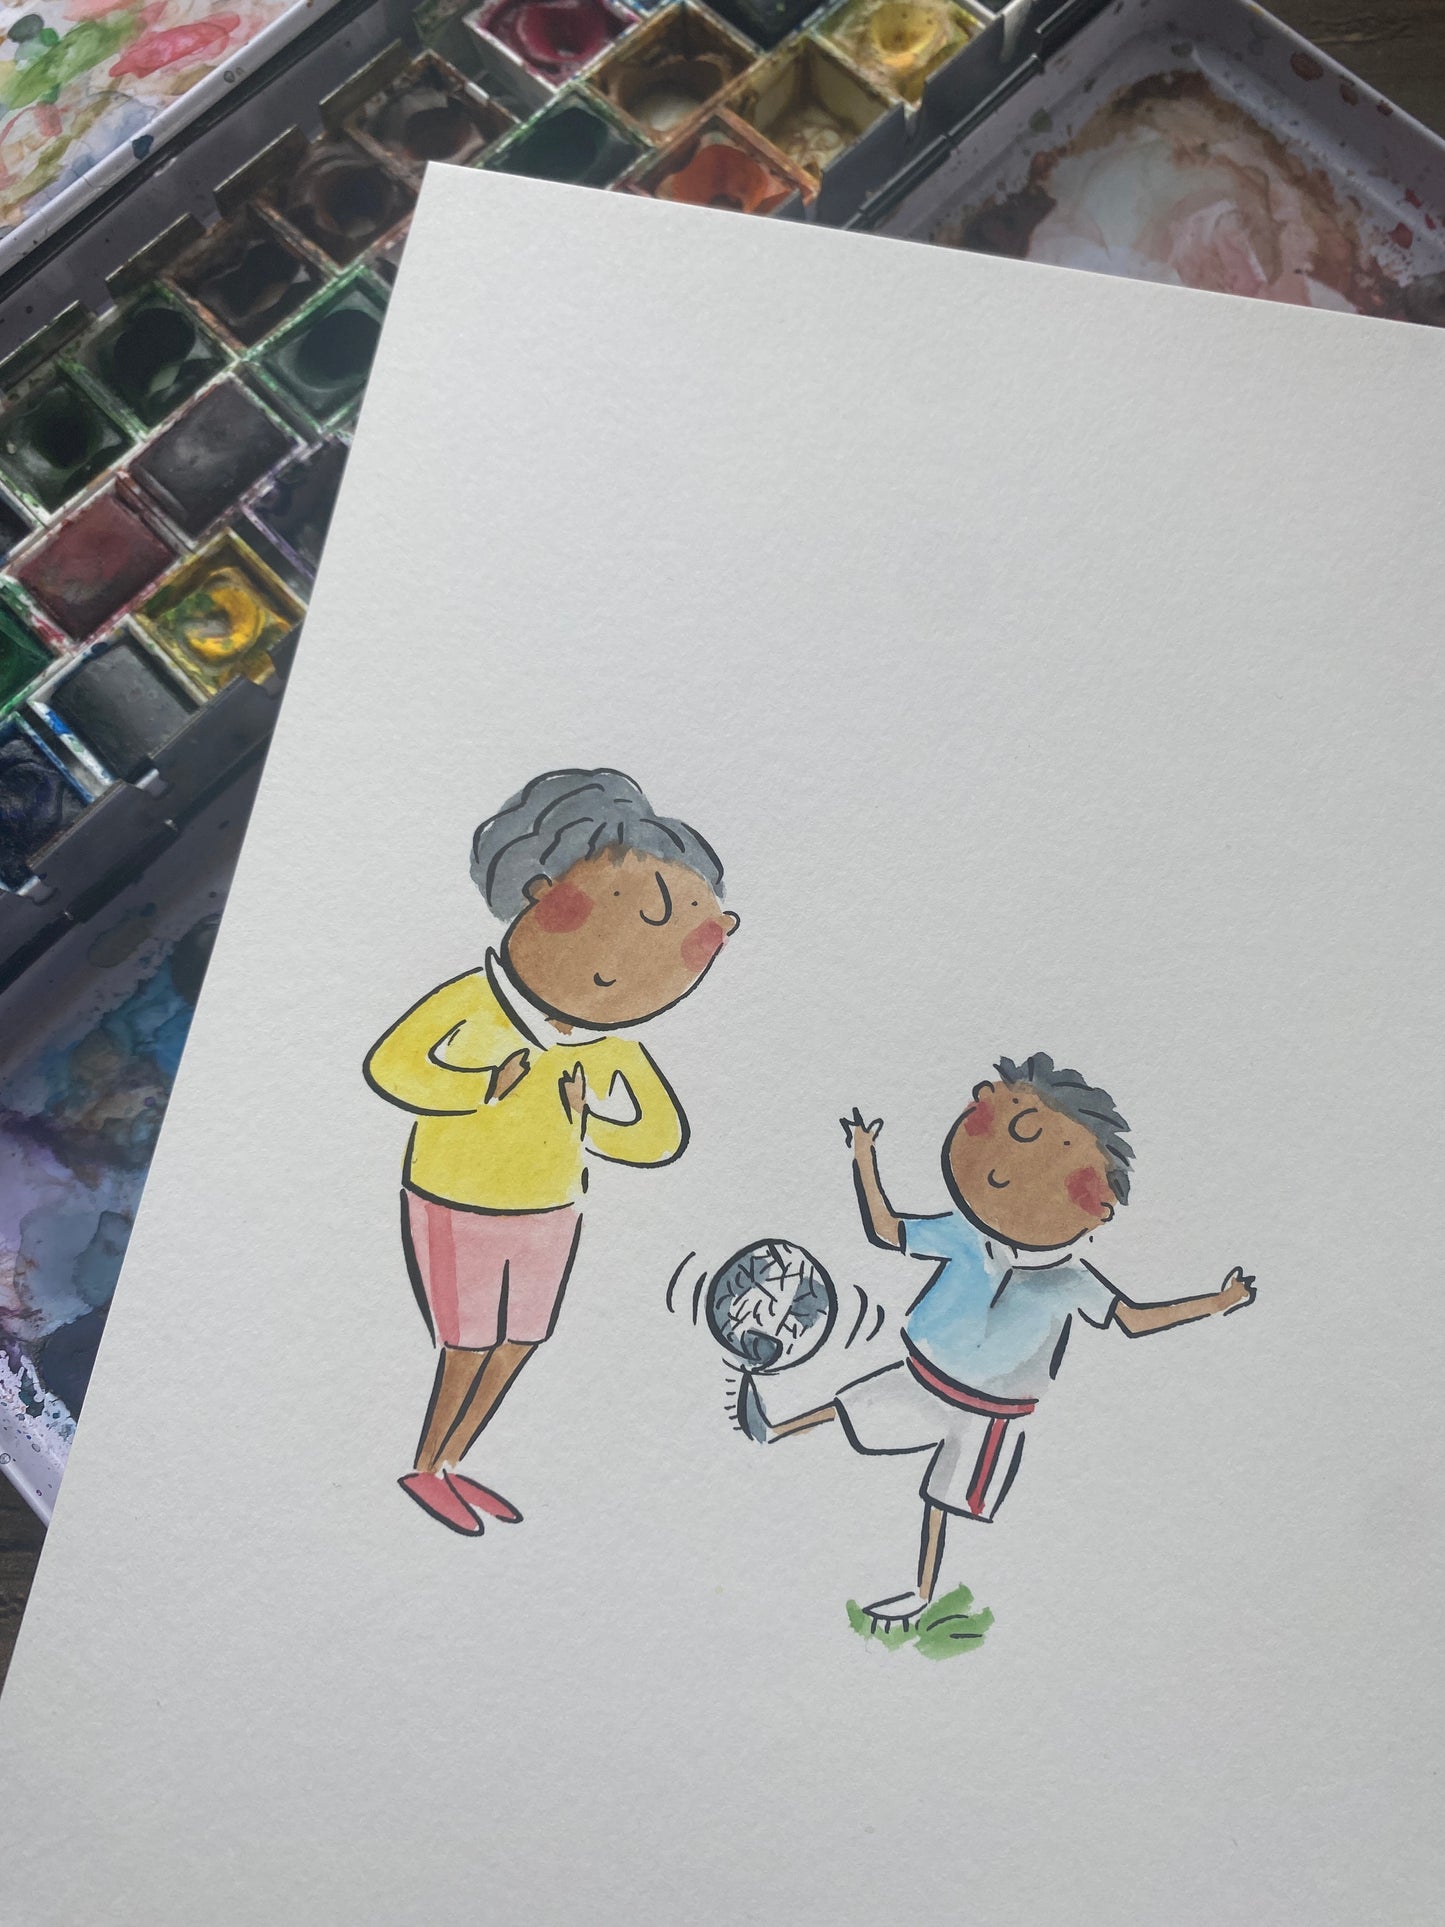 Football Mum original pen and ink and watercolour illustration by Rosie Brooks